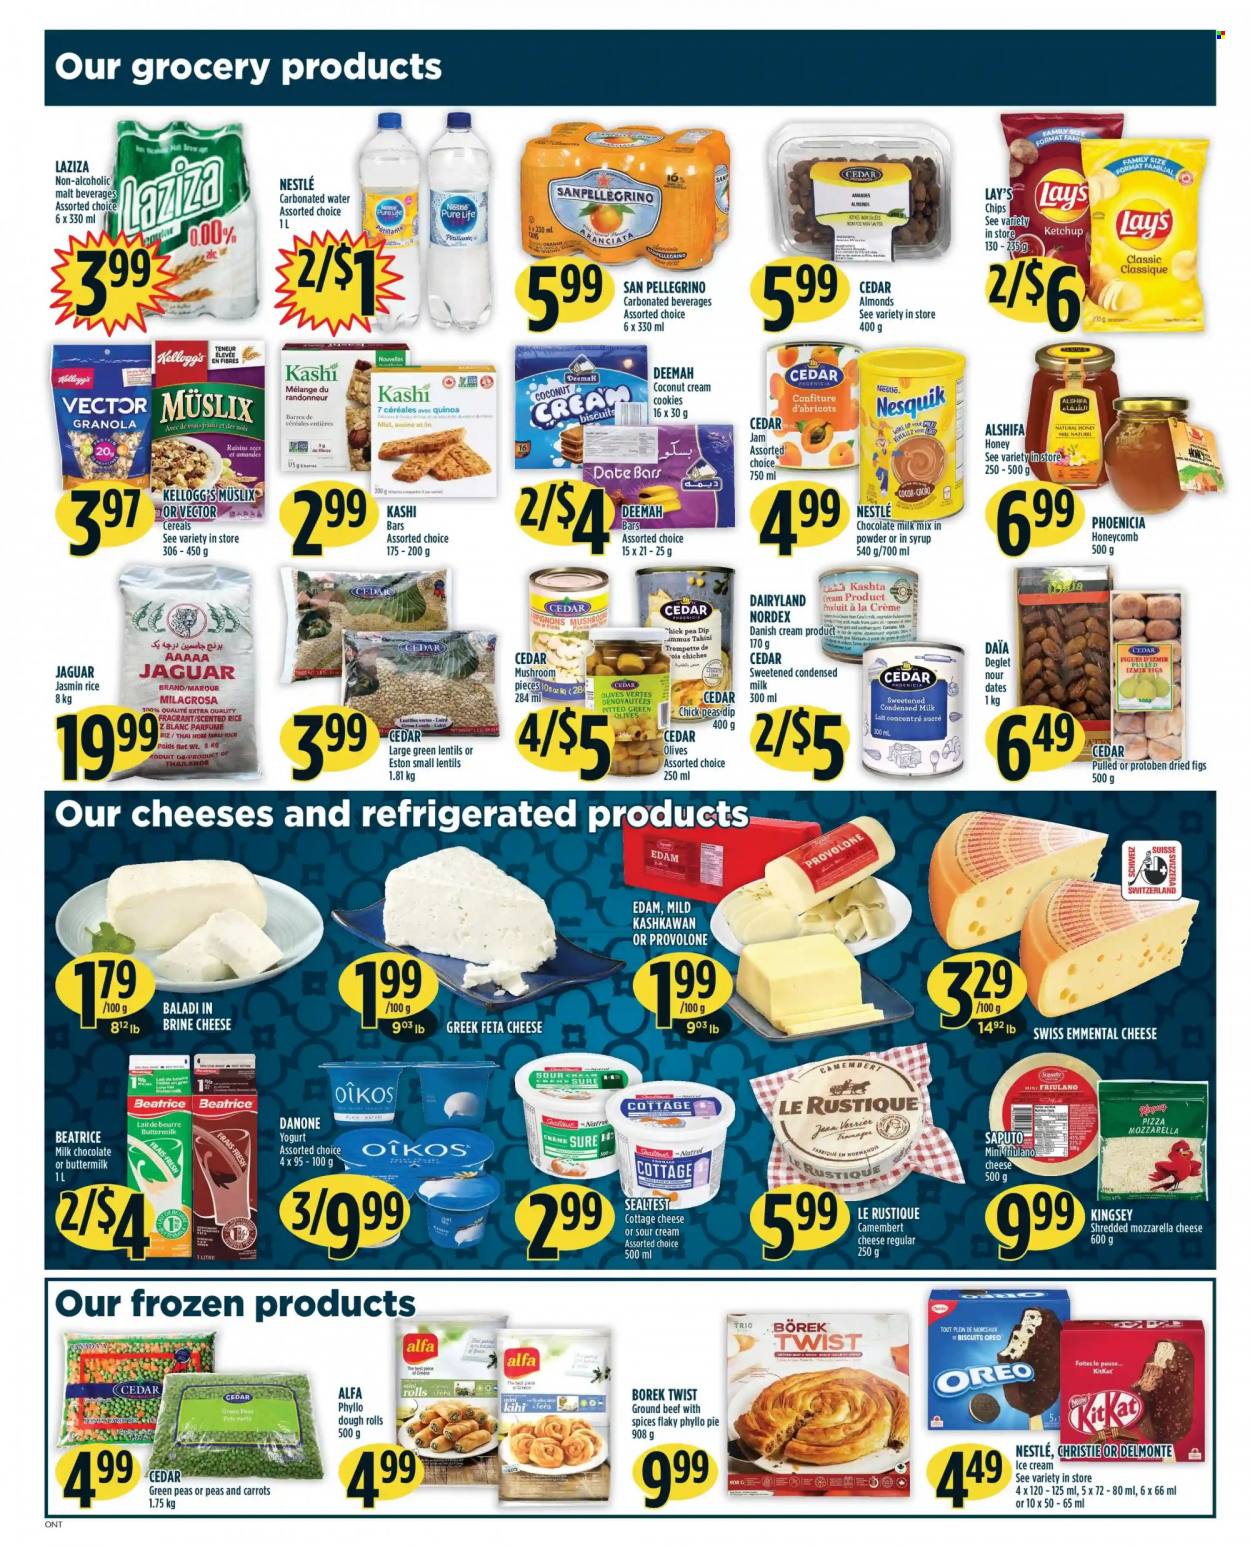 thumbnail - Adonis Flyer - January 20, 2022 - January 26, 2022 - Sales products - pie, carrots, figs, coconut, pizza, cottage cheese, edam cheese, feta, Provolone, yoghurt, Oikos, buttermilk, condensed milk, sour cream, dip, ice cream, cookies, milk chocolate, KitKat, Kellogg's, biscuit, Lay’s, lentils, cereals, rice, tahini, honey, fruit jam, almonds, dried fruit, dried figs, San Pellegrino, beef meat, ground beef, Sure, Oreo, Danone, Nesquik, Nestlé, camembert, granola, quinoa, raisins, ketchup, olives. Page 4.